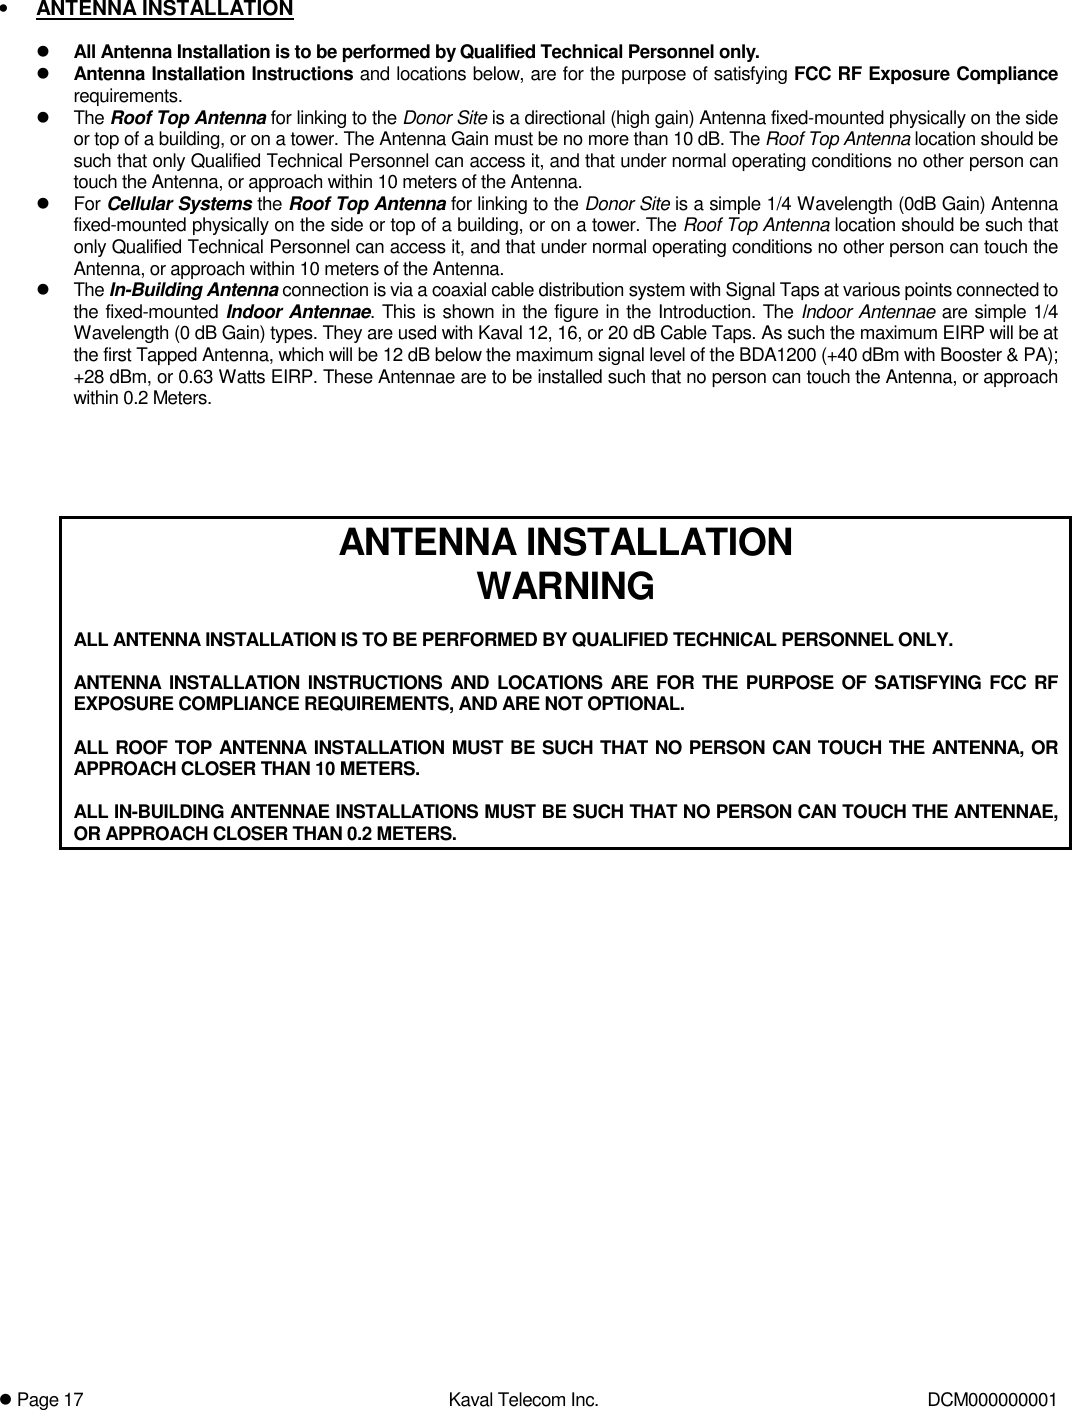 ! Page 17  Kaval Telecom Inc.  DCM000000001  •  ANTENNA INSTALLATION  ! All Antenna Installation is to be performed by Qualified Technical Personnel only. ! Antenna Installation Instructions and locations below, are for the purpose of satisfying FCC RF Exposure Compliance requirements. ! The Roof Top Antenna for linking to the Donor Site is a directional (high gain) Antenna fixed-mounted physically on the side or top of a building, or on a tower. The Antenna Gain must be no more than 10 dB. The Roof Top Antenna location should be such that only Qualified Technical Personnel can access it, and that under normal operating conditions no other person can touch the Antenna, or approach within 10 meters of the Antenna. ! For Cellular Systems the Roof Top Antenna for linking to the Donor Site is a simple 1/4 Wavelength (0dB Gain) Antenna fixed-mounted physically on the side or top of a building, or on a tower. The Roof Top Antenna location should be such that only Qualified Technical Personnel can access it, and that under normal operating conditions no other person can touch the Antenna, or approach within 10 meters of the Antenna. ! The In-Building Antenna connection is via a coaxial cable distribution system with Signal Taps at various points connected to the fixed-mounted Indoor Antennae. This is shown in the figure in the Introduction. The Indoor Antennae are simple 1/4 Wavelength (0 dB Gain) types. They are used with Kaval 12, 16, or 20 dB Cable Taps. As such the maximum EIRP will be at the first Tapped Antenna, which will be 12 dB below the maximum signal level of the BDA1200 (+40 dBm with Booster &amp; PA); +28 dBm, or 0.63 Watts EIRP. These Antennae are to be installed such that no person can touch the Antenna, or approach within 0.2 Meters.      ANTENNA INSTALLATION WARNING  ALL ANTENNA INSTALLATION IS TO BE PERFORMED BY QUALIFIED TECHNICAL PERSONNEL ONLY.  ANTENNA INSTALLATION INSTRUCTIONS AND LOCATIONS ARE FOR THE PURPOSE OF SATISFYING FCC RF EXPOSURE COMPLIANCE REQUIREMENTS, AND ARE NOT OPTIONAL.  ALL ROOF TOP ANTENNA INSTALLATION MUST BE SUCH THAT NO PERSON CAN TOUCH THE ANTENNA, OR APPROACH CLOSER THAN 10 METERS.  ALL IN-BUILDING ANTENNAE INSTALLATIONS MUST BE SUCH THAT NO PERSON CAN TOUCH THE ANTENNAE,  OR APPROACH CLOSER THAN 0.2 METERS.     